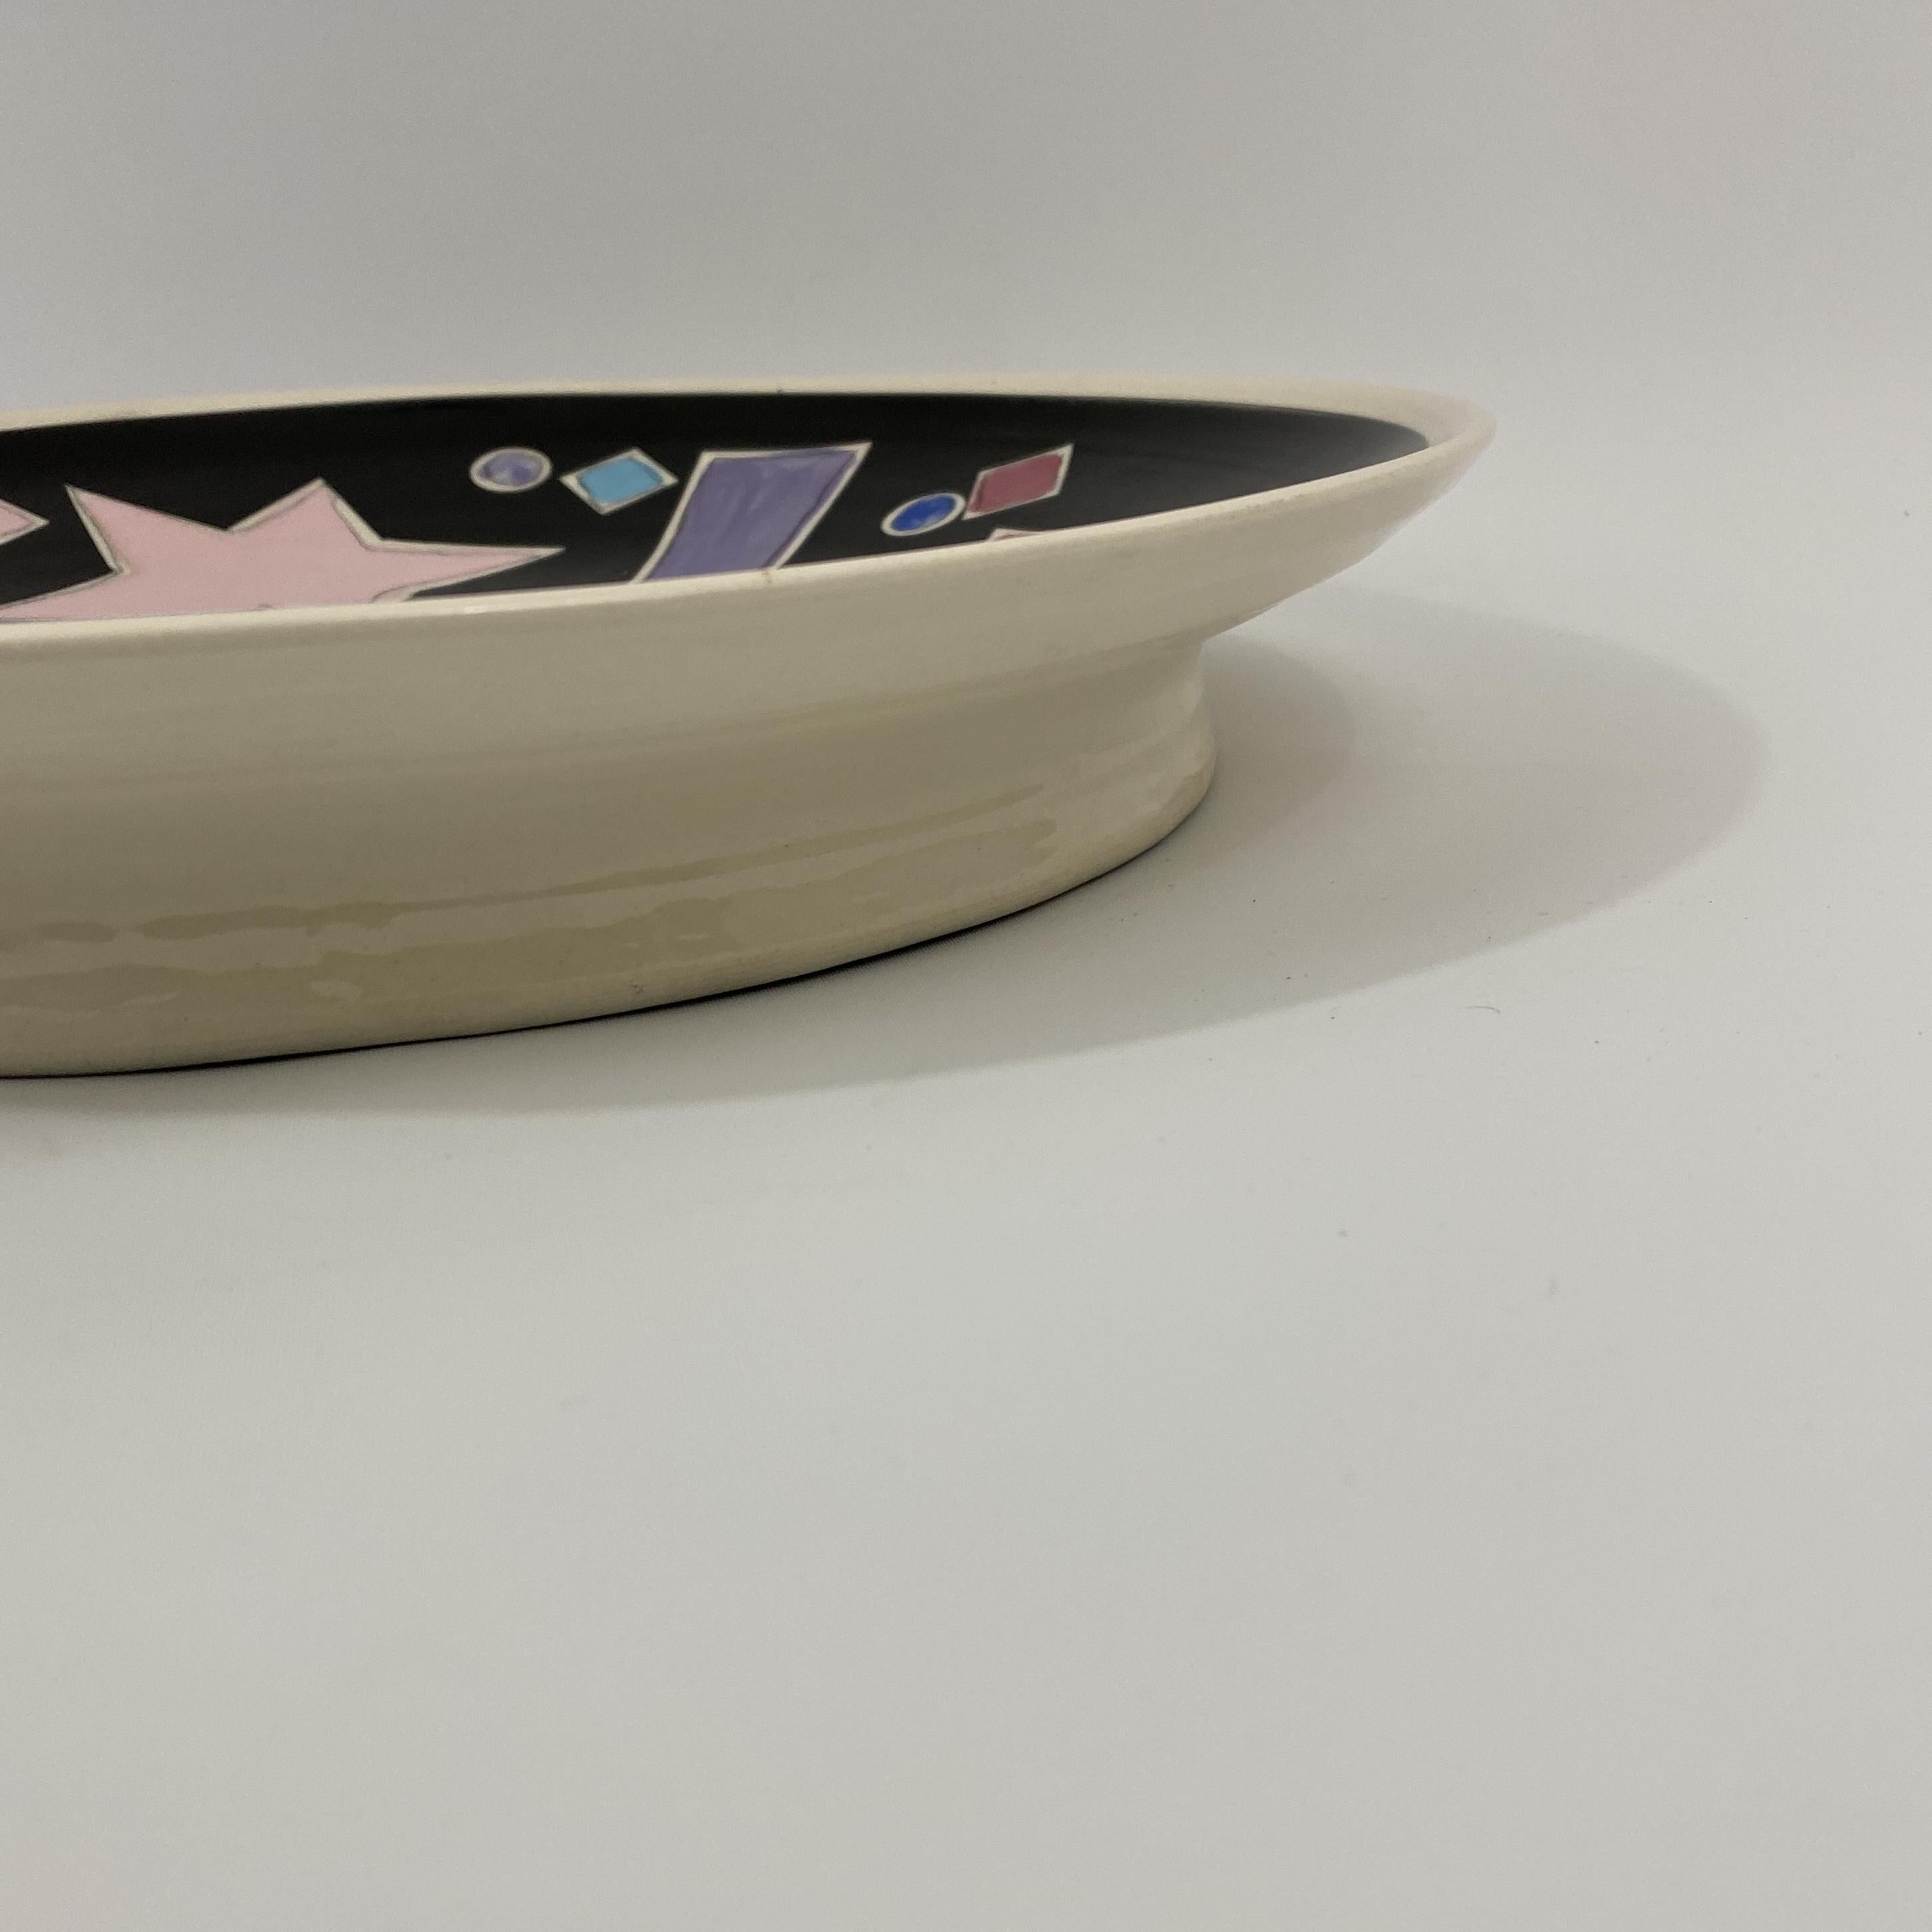 1988 Ted Saito Signed Artist Studio Pottery Pop Art Dish In Good Condition For Sale In Westfield, NJ